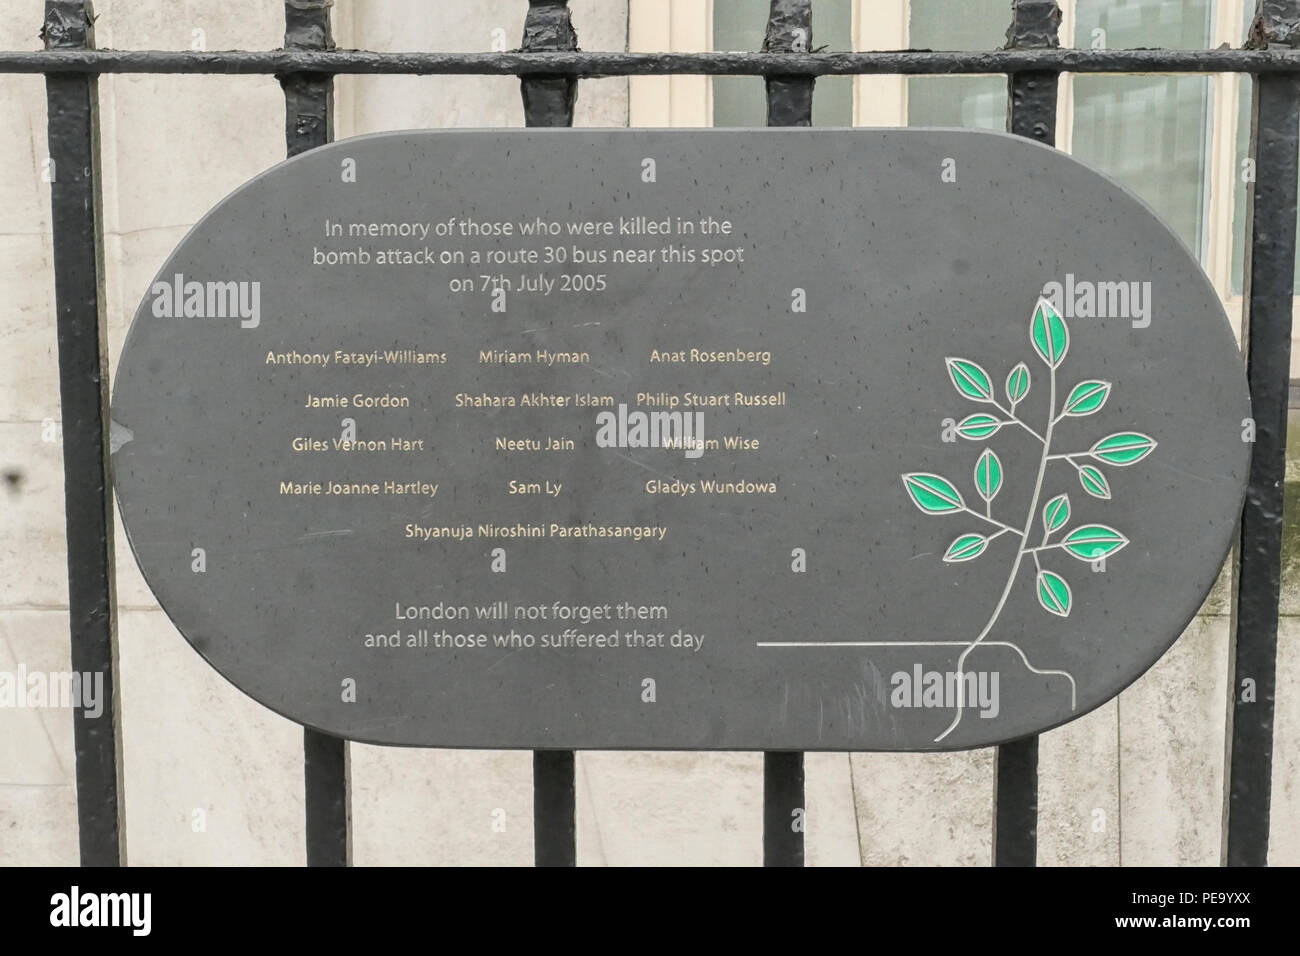 A plaque on railings in Tavistock Square in memory of those killed in the 7th July 2005 terrorist attack on a London bus. Stock Photo